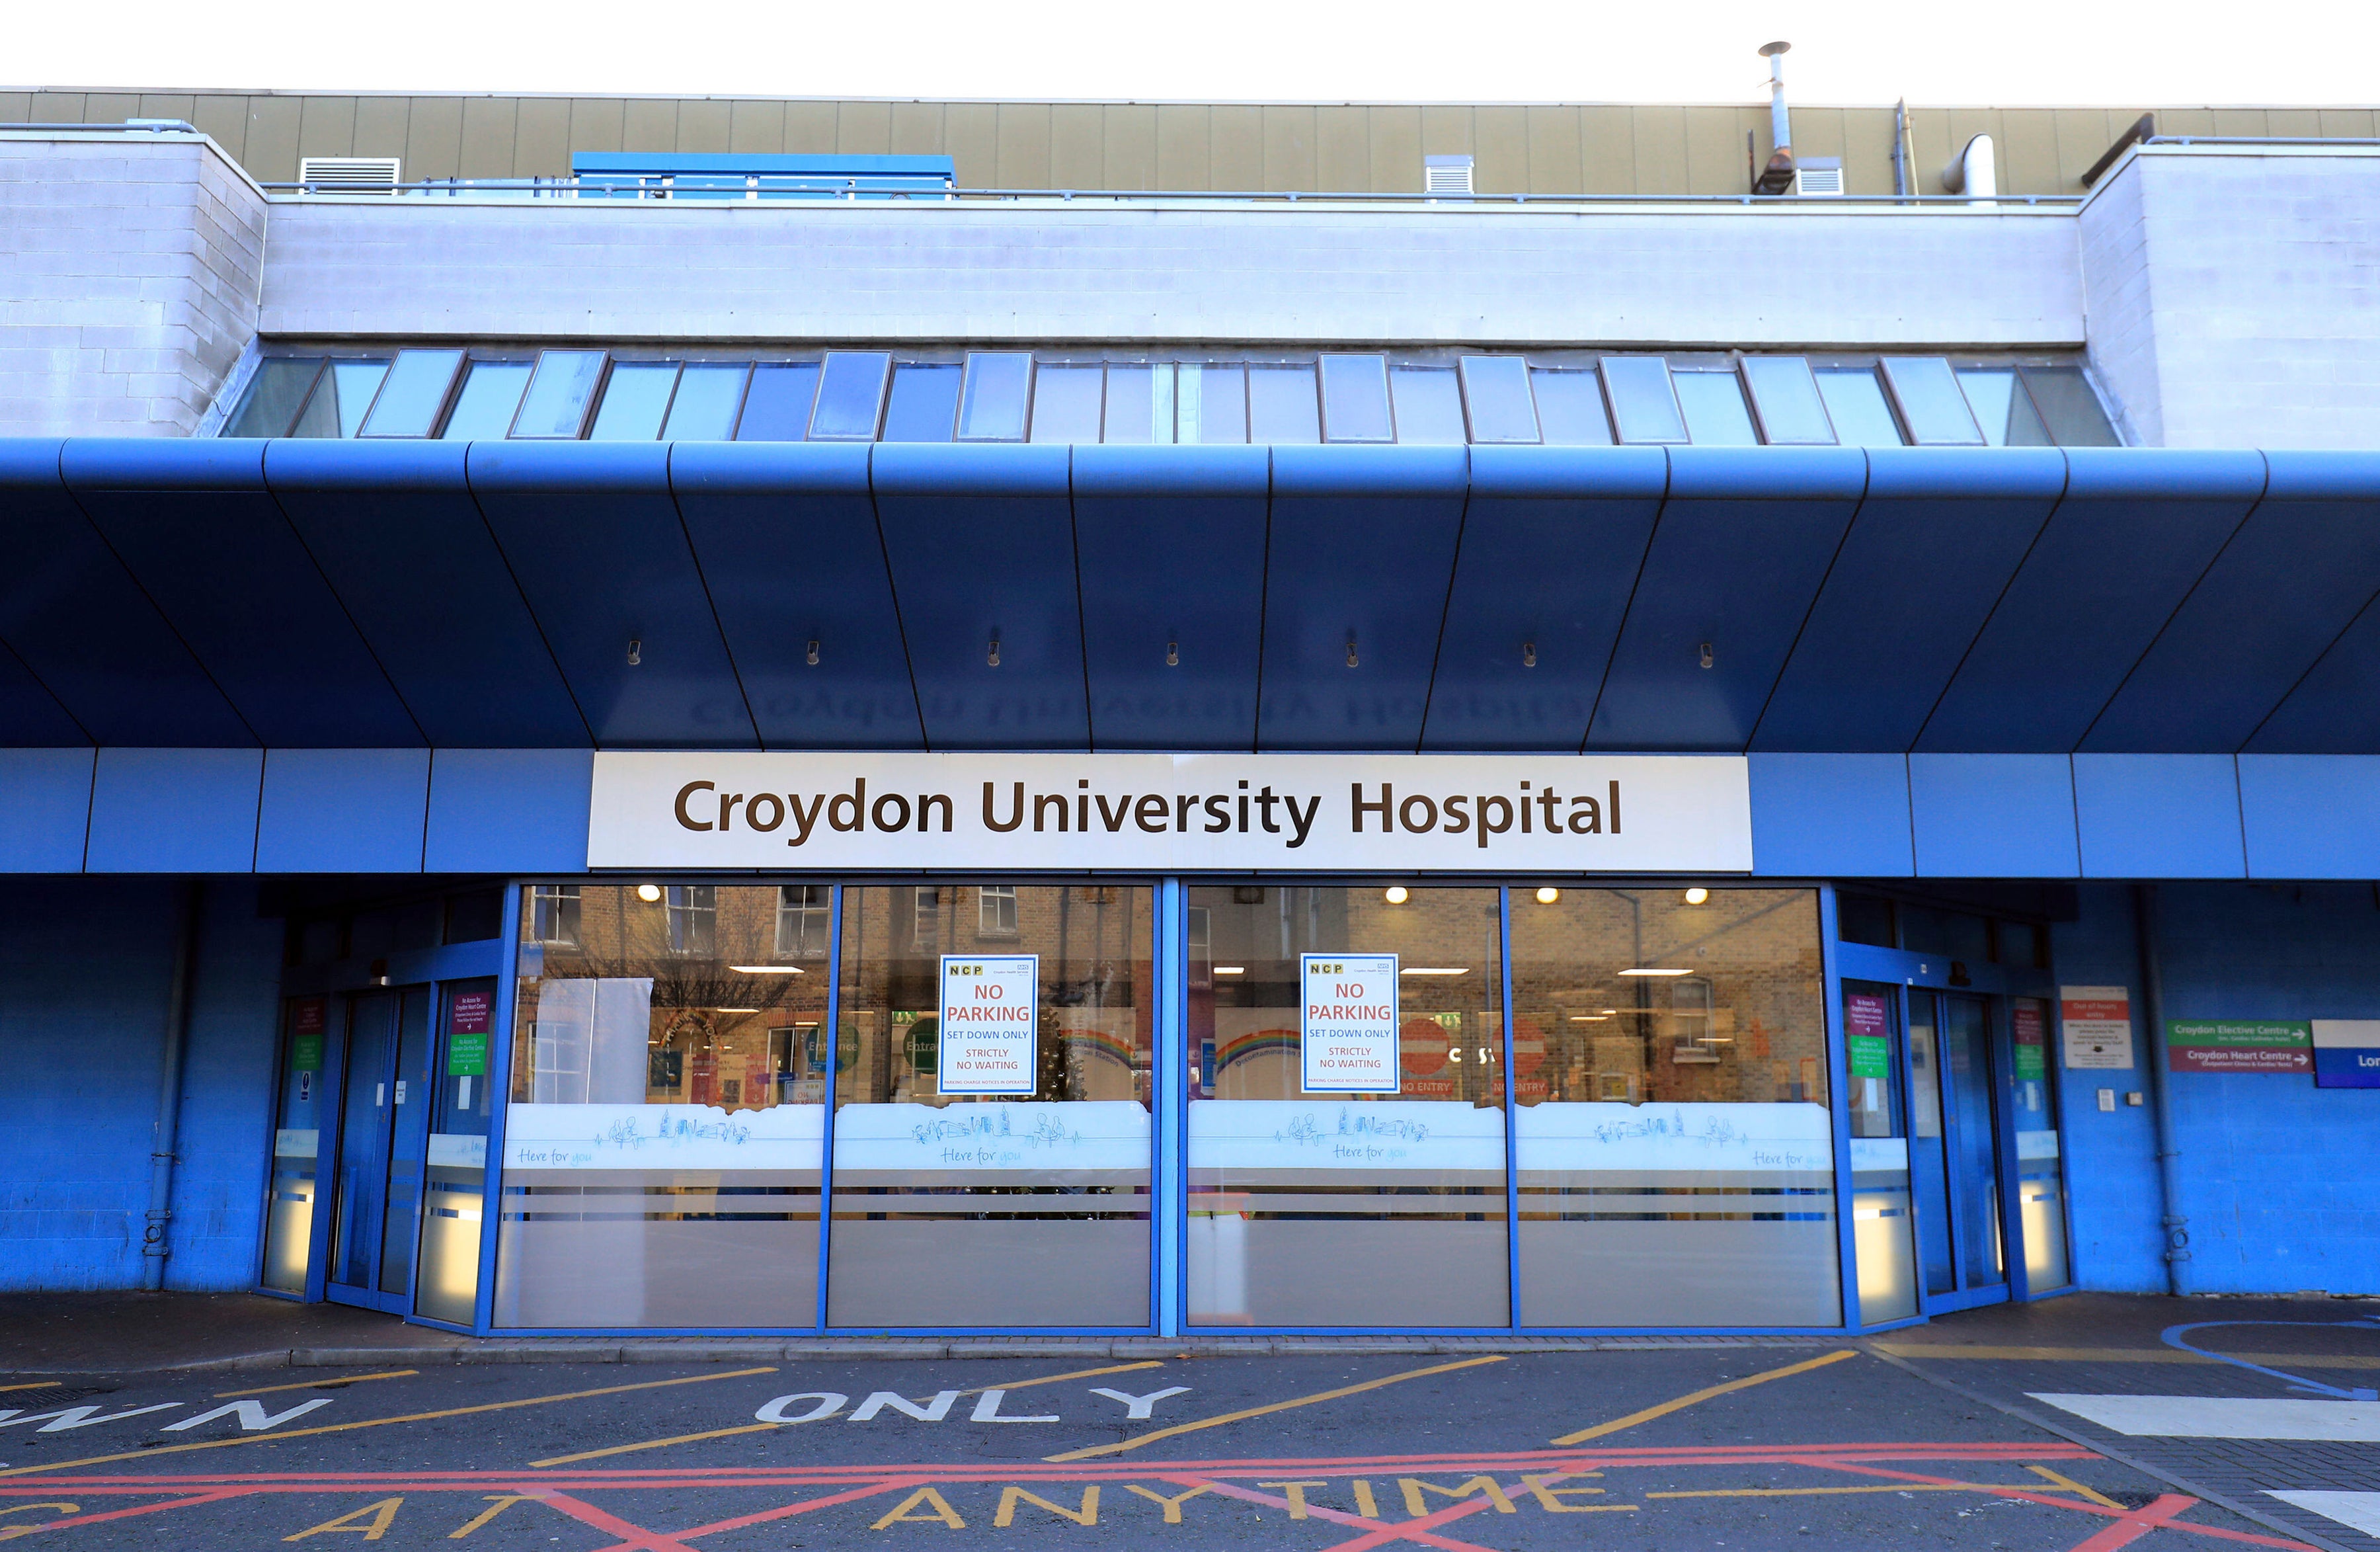 Parts of Croydon University Hospital were closed off after a woman was rushed to hospital over fears she had ingested poison